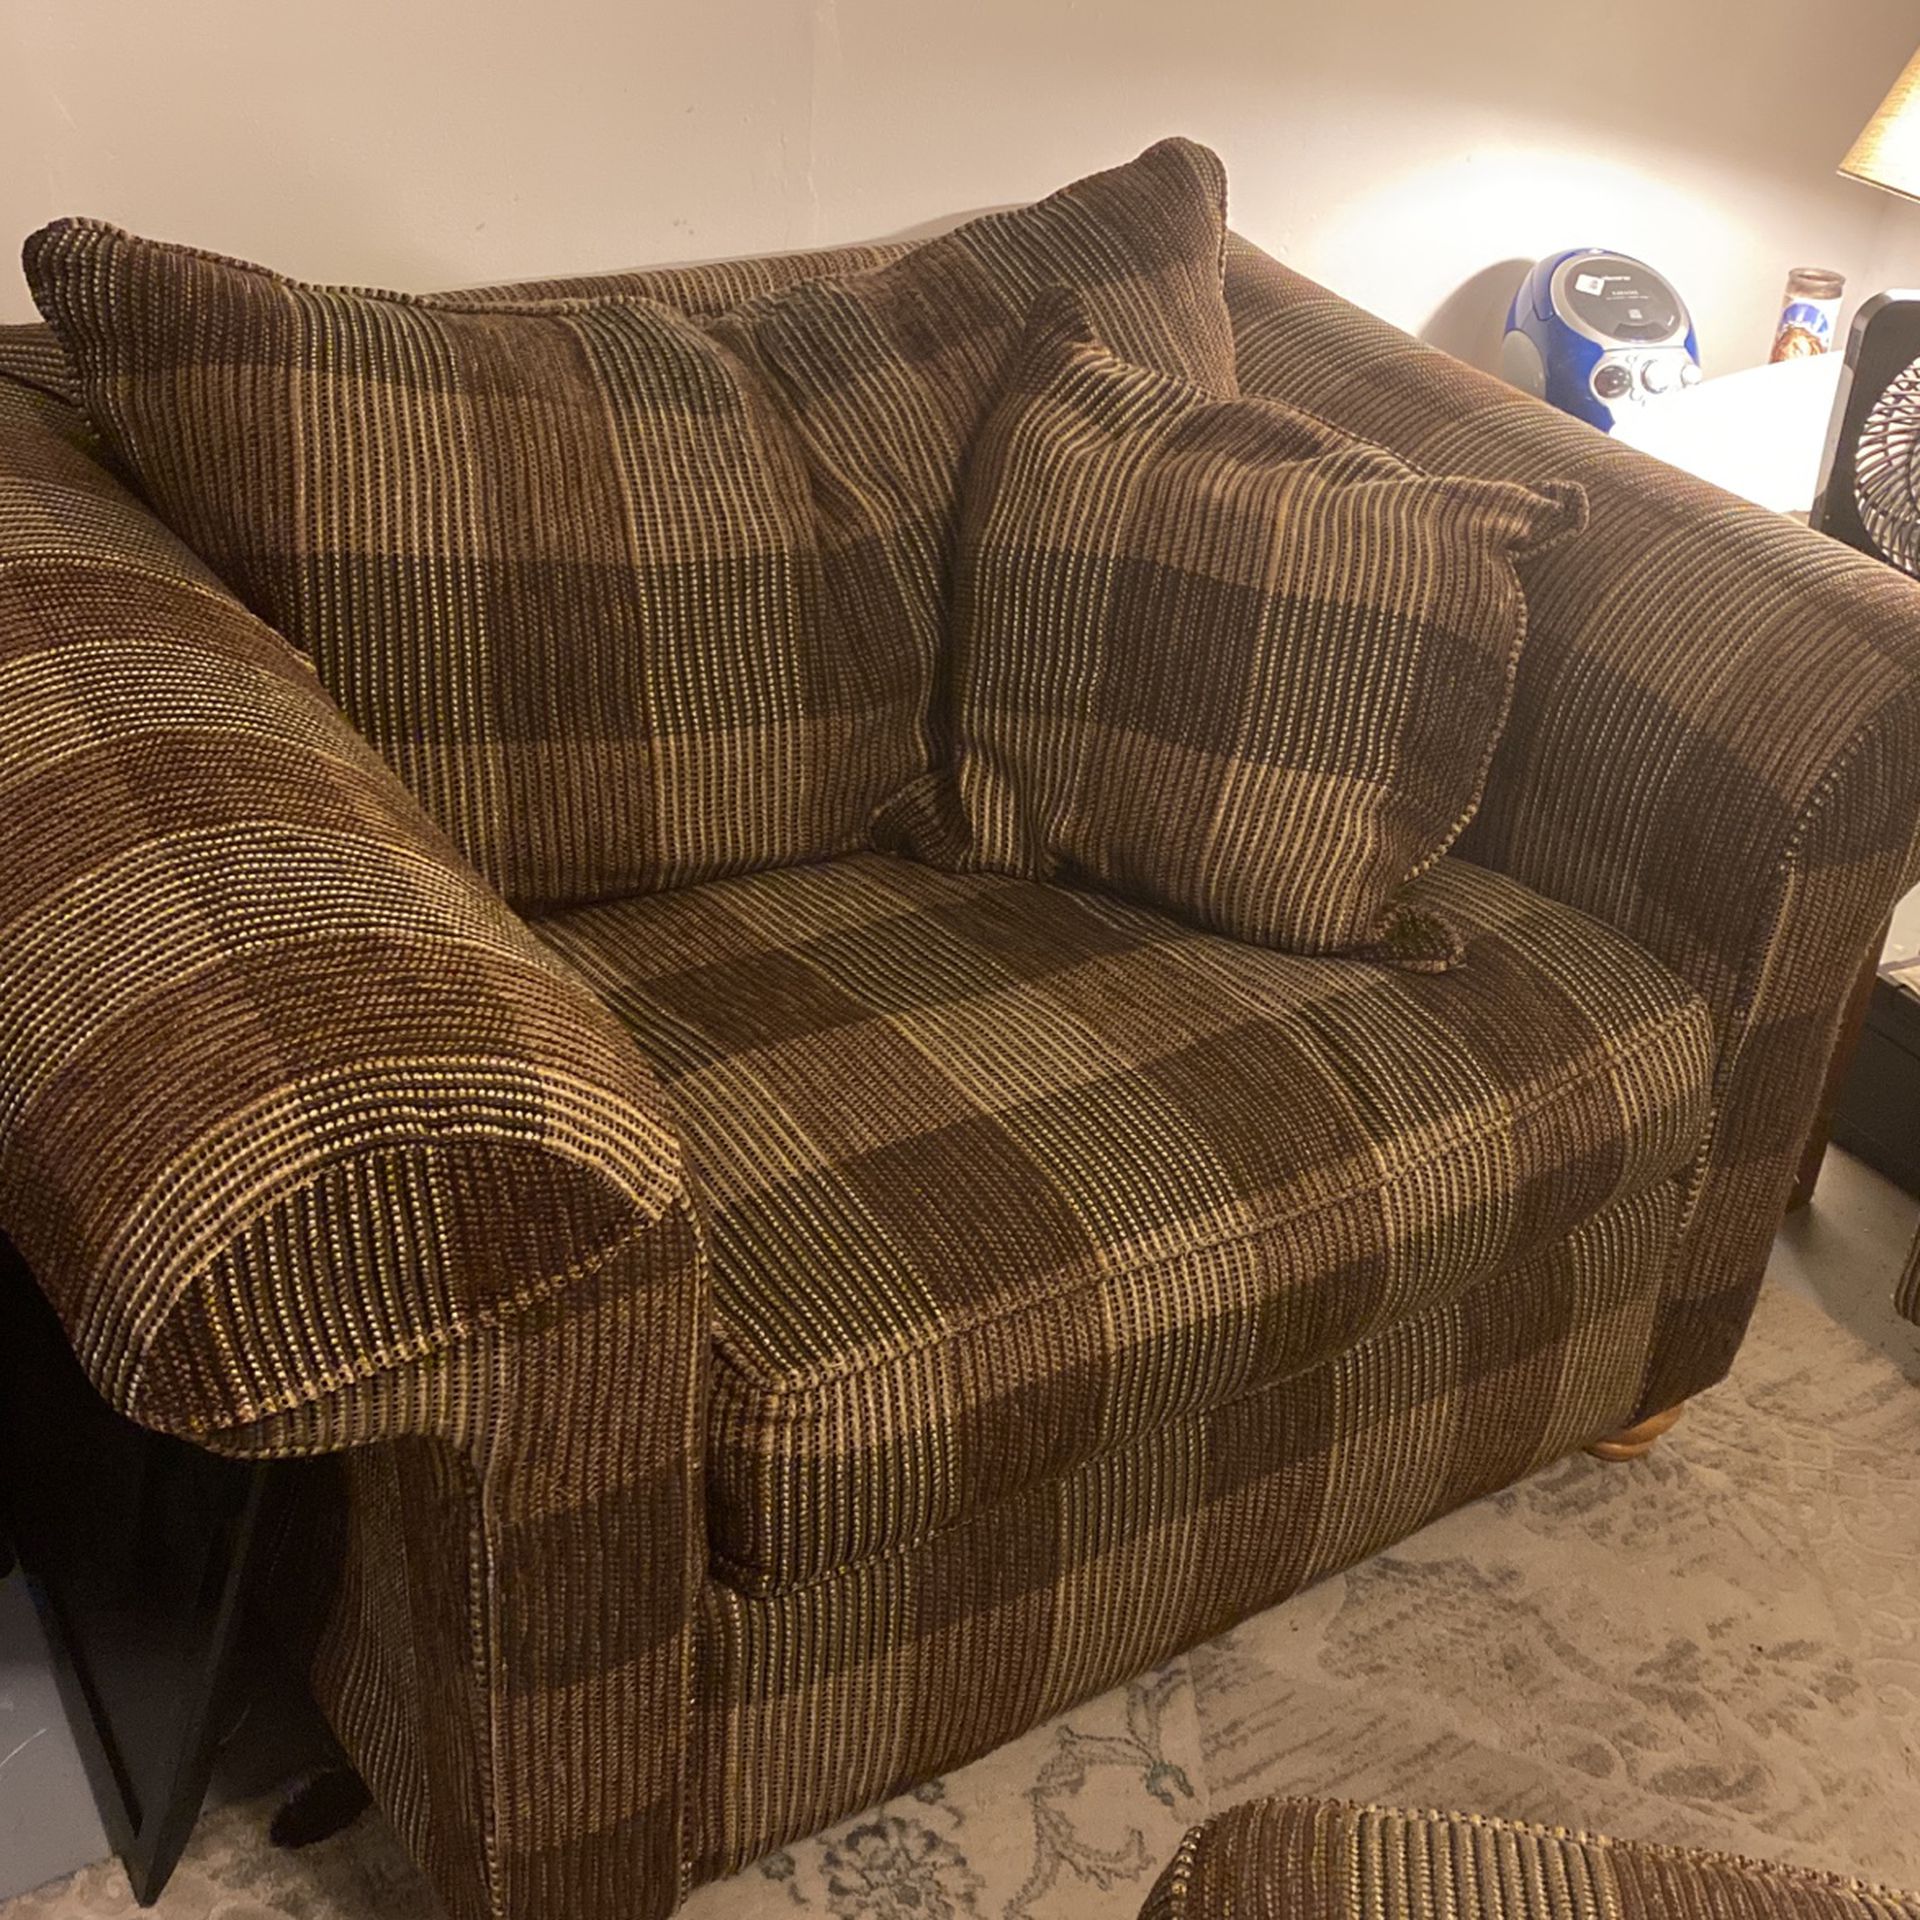 Love Seat, Couch Chair, Ottoman- Clean House, Smoke Free $225 OBO 